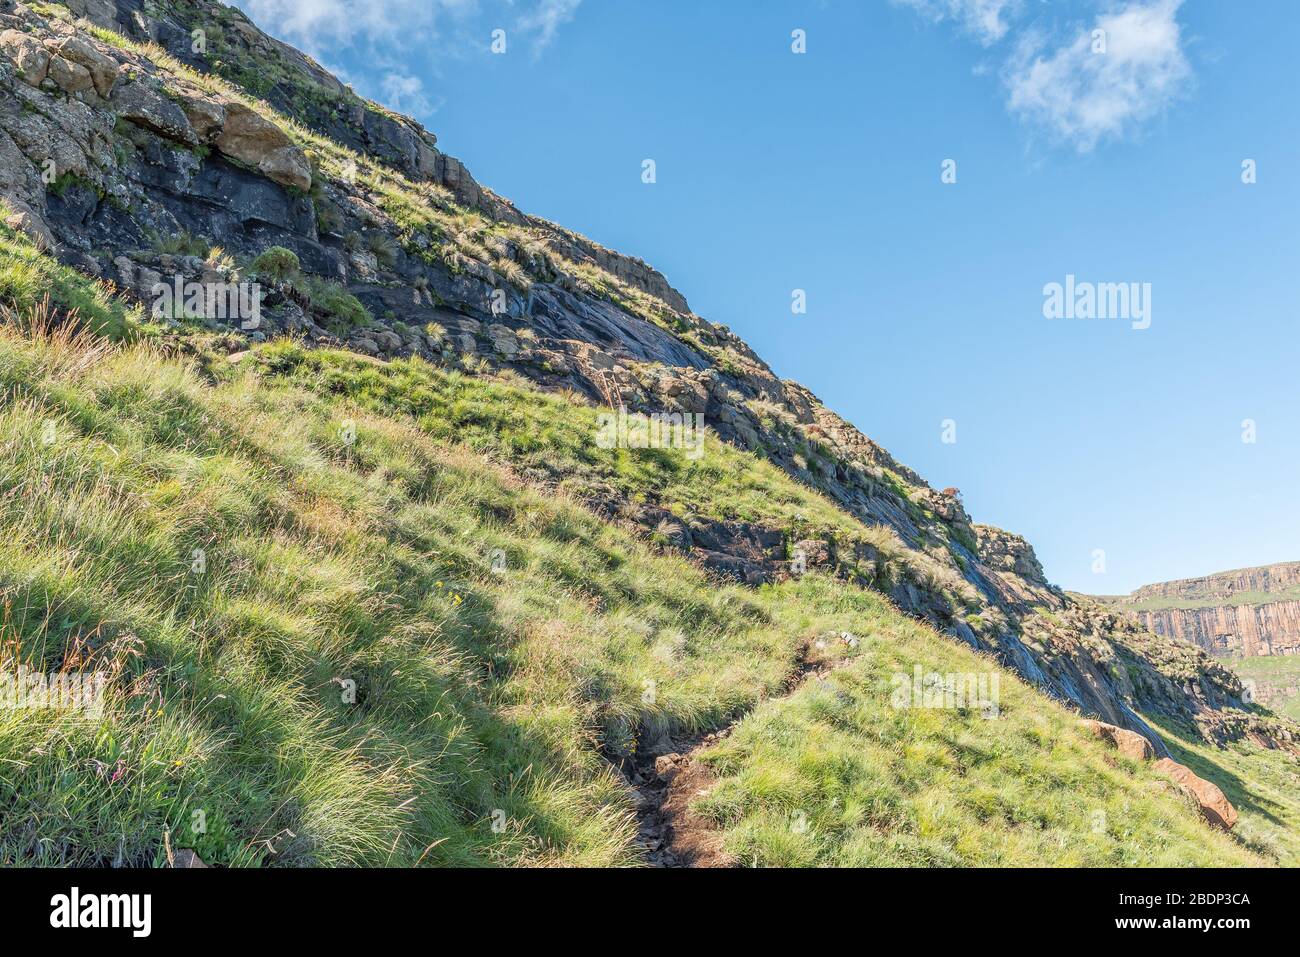 The Sentinel hiking trail to the chain ladders and Tugela Falls, with a small steel ladder on the route visible Stock Photo